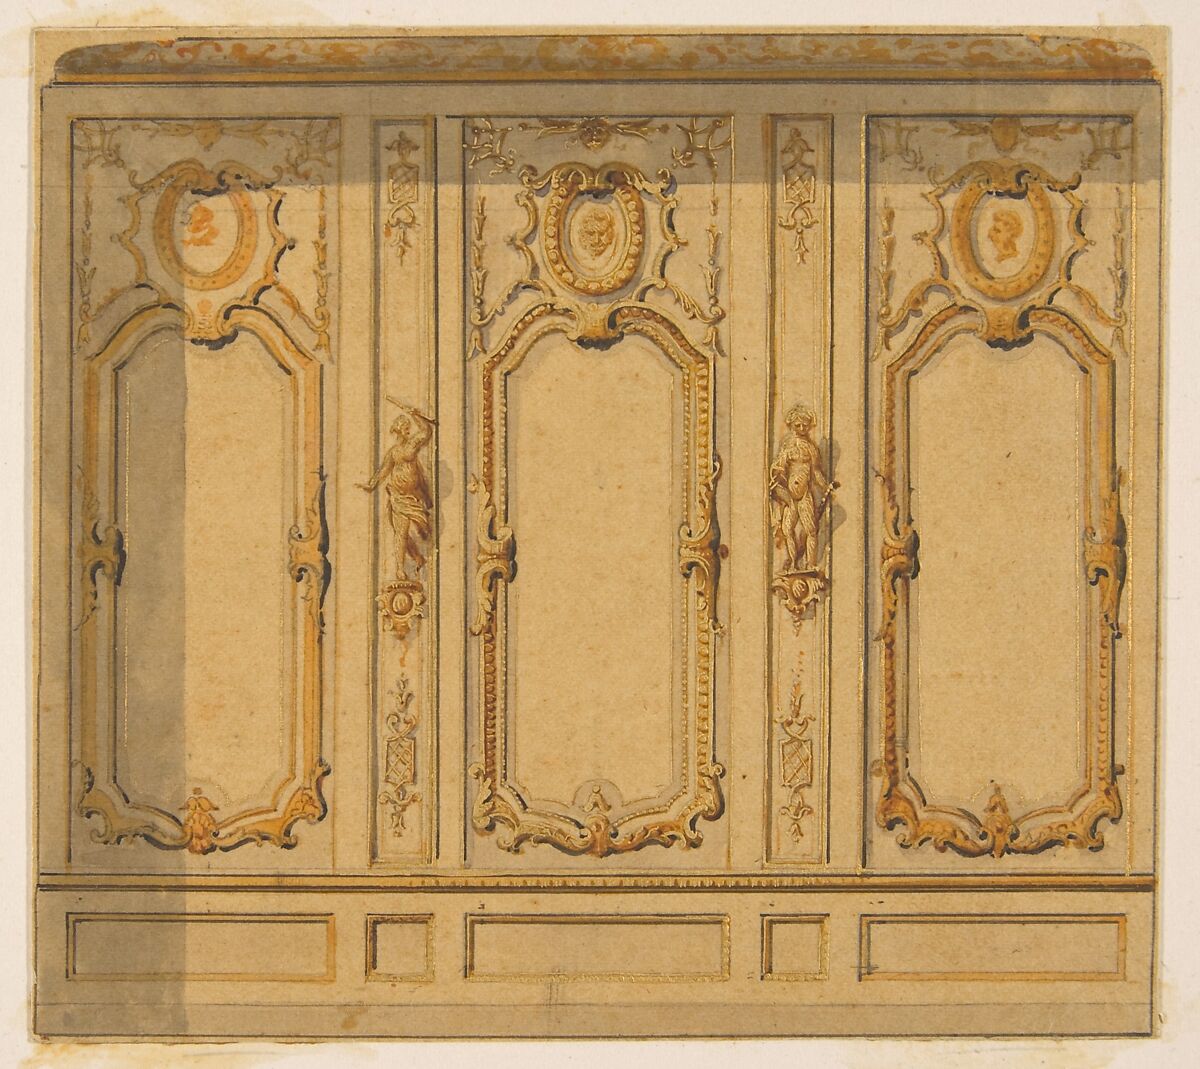 Elevation of an interior showing a wall decorated in ornate panels and mounted statuettes, Jules-Edmond-Charles Lachaise (French, died 1897), graphite, pen and ink, watercolor, and gold paint on wove paper; mounted on wove paper 